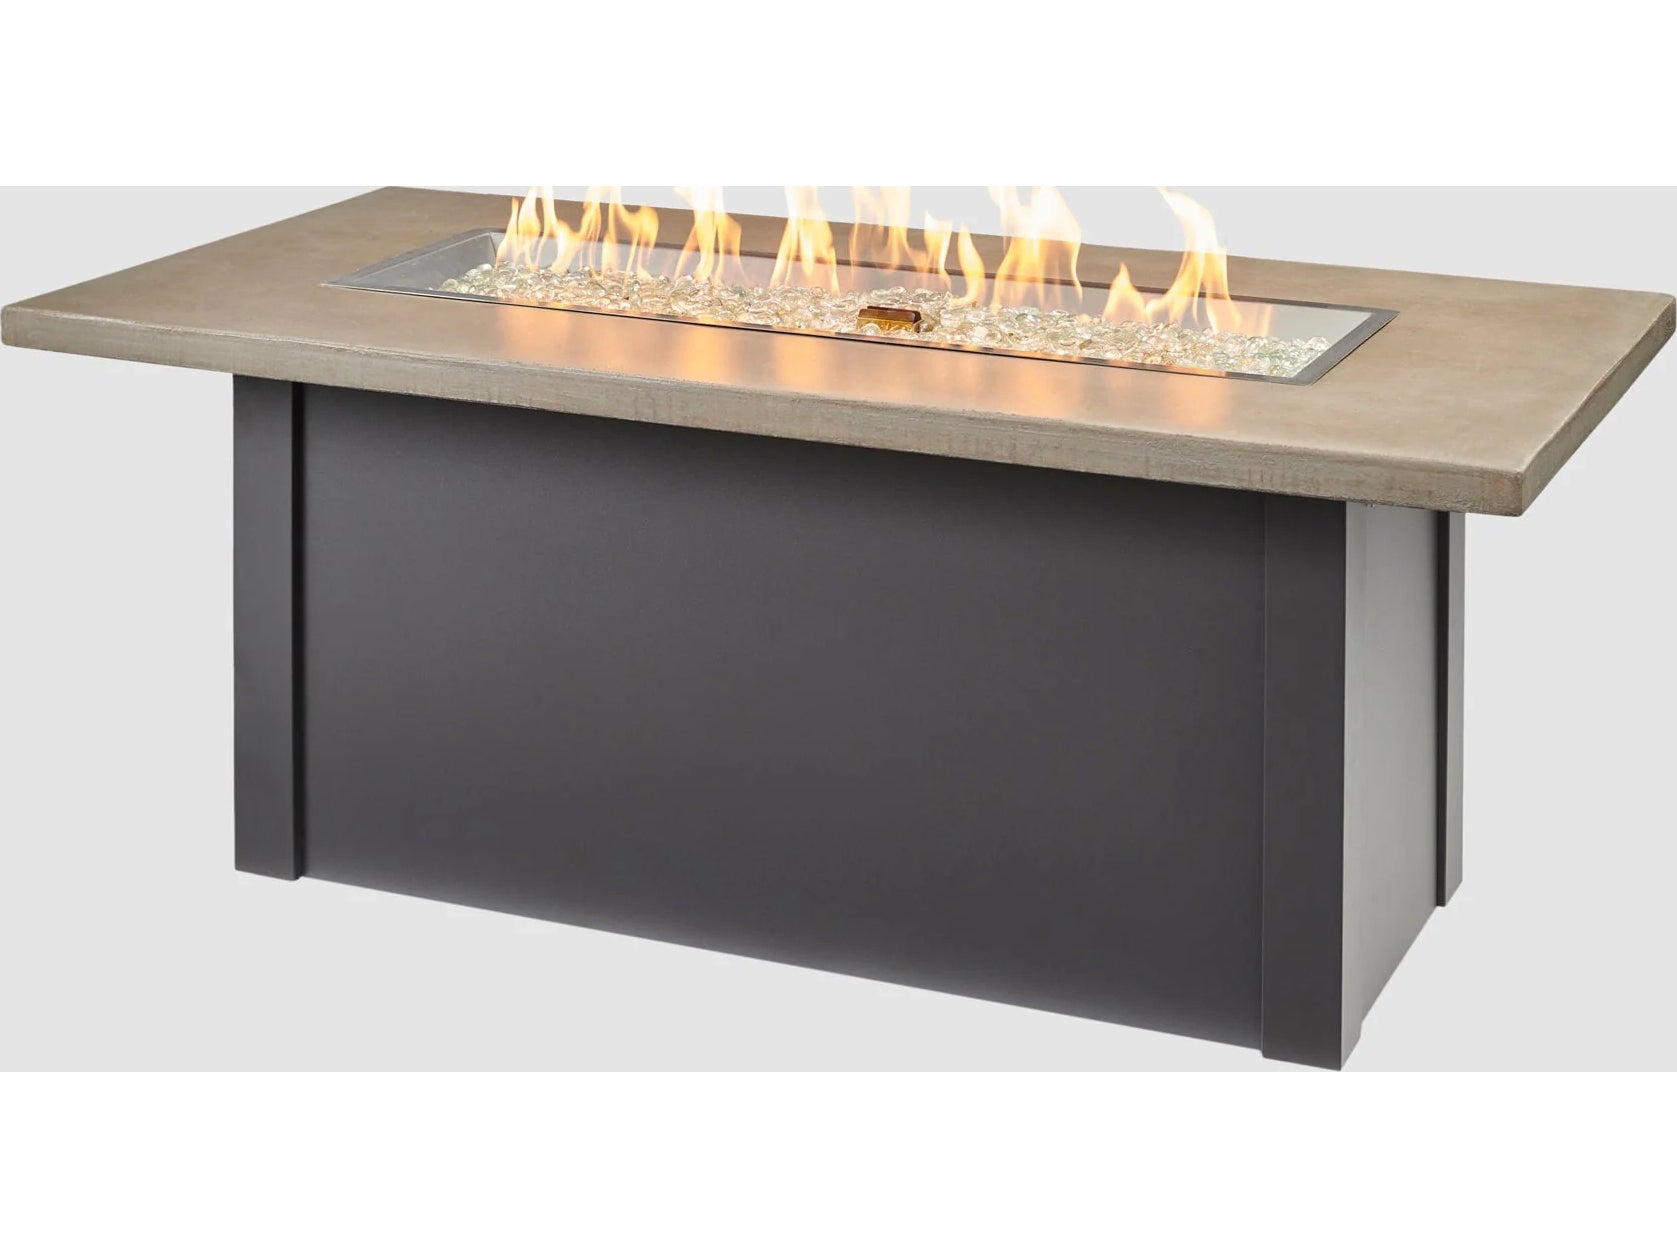 Outdoor Greatroom - 62’‘ x 30’' - Havenwood Rectangular Gas Fire Pit Table - Steel Graphite Grey with Pebble Grey Everblend Top